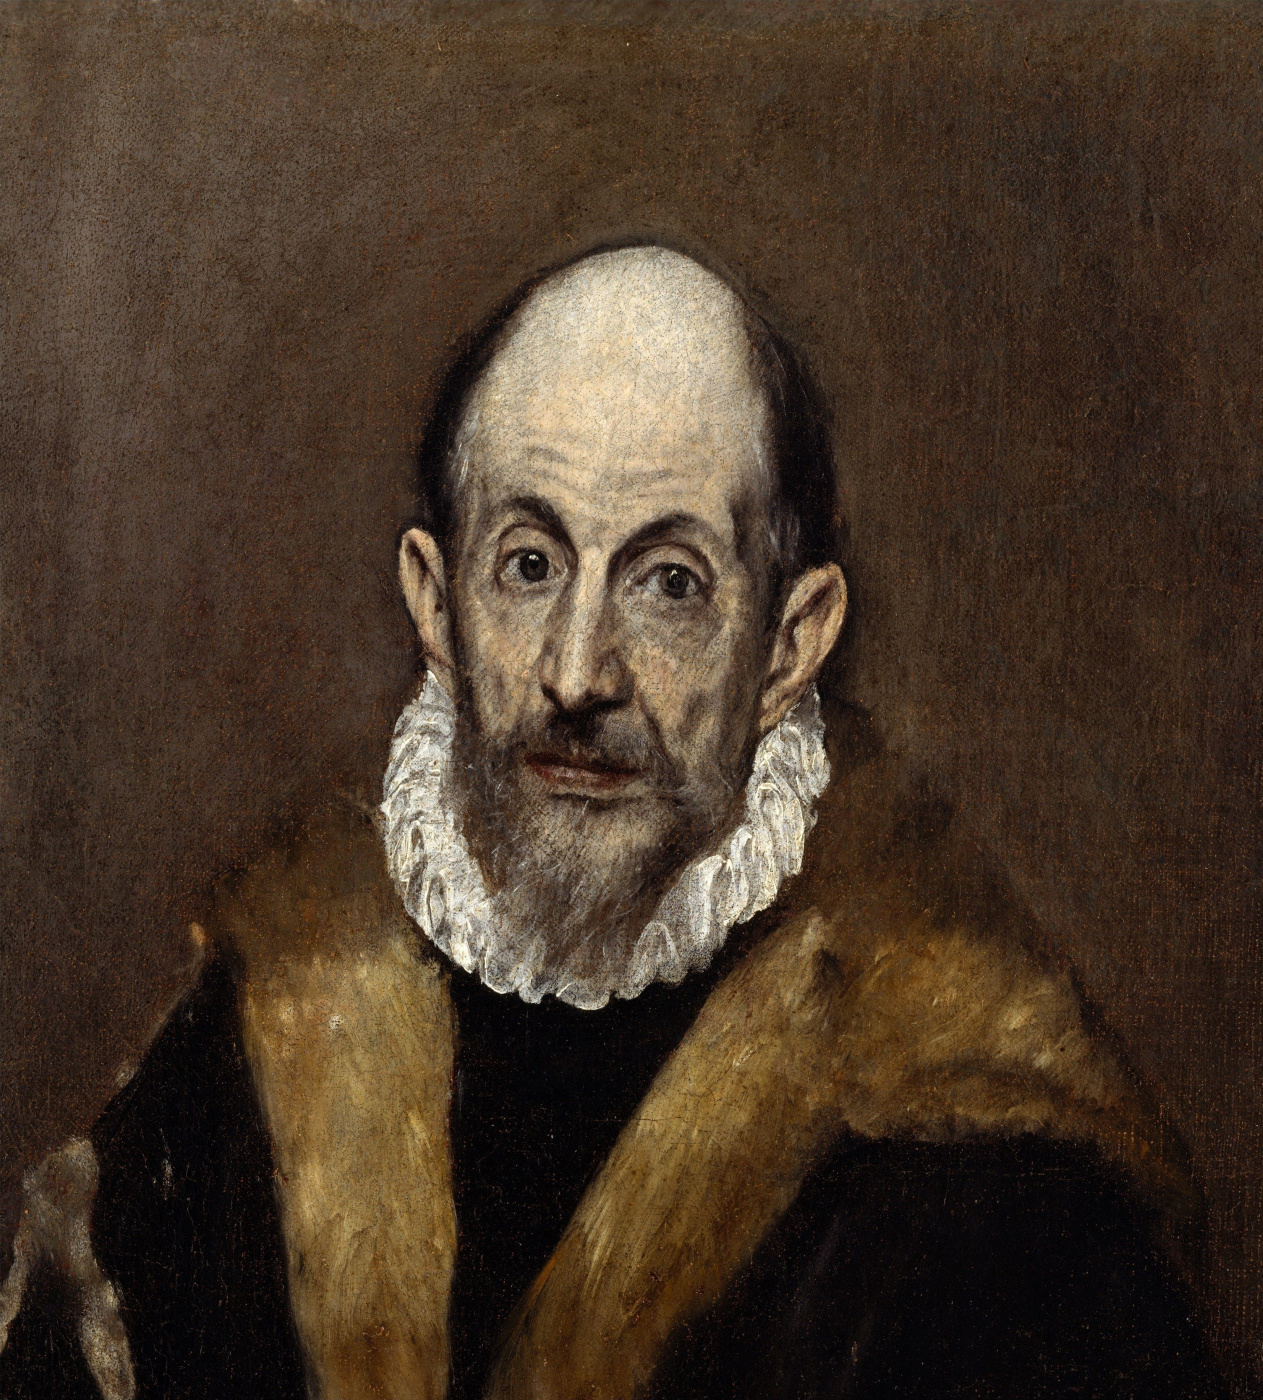 El Greco from A to Z: Life, Death and Revival